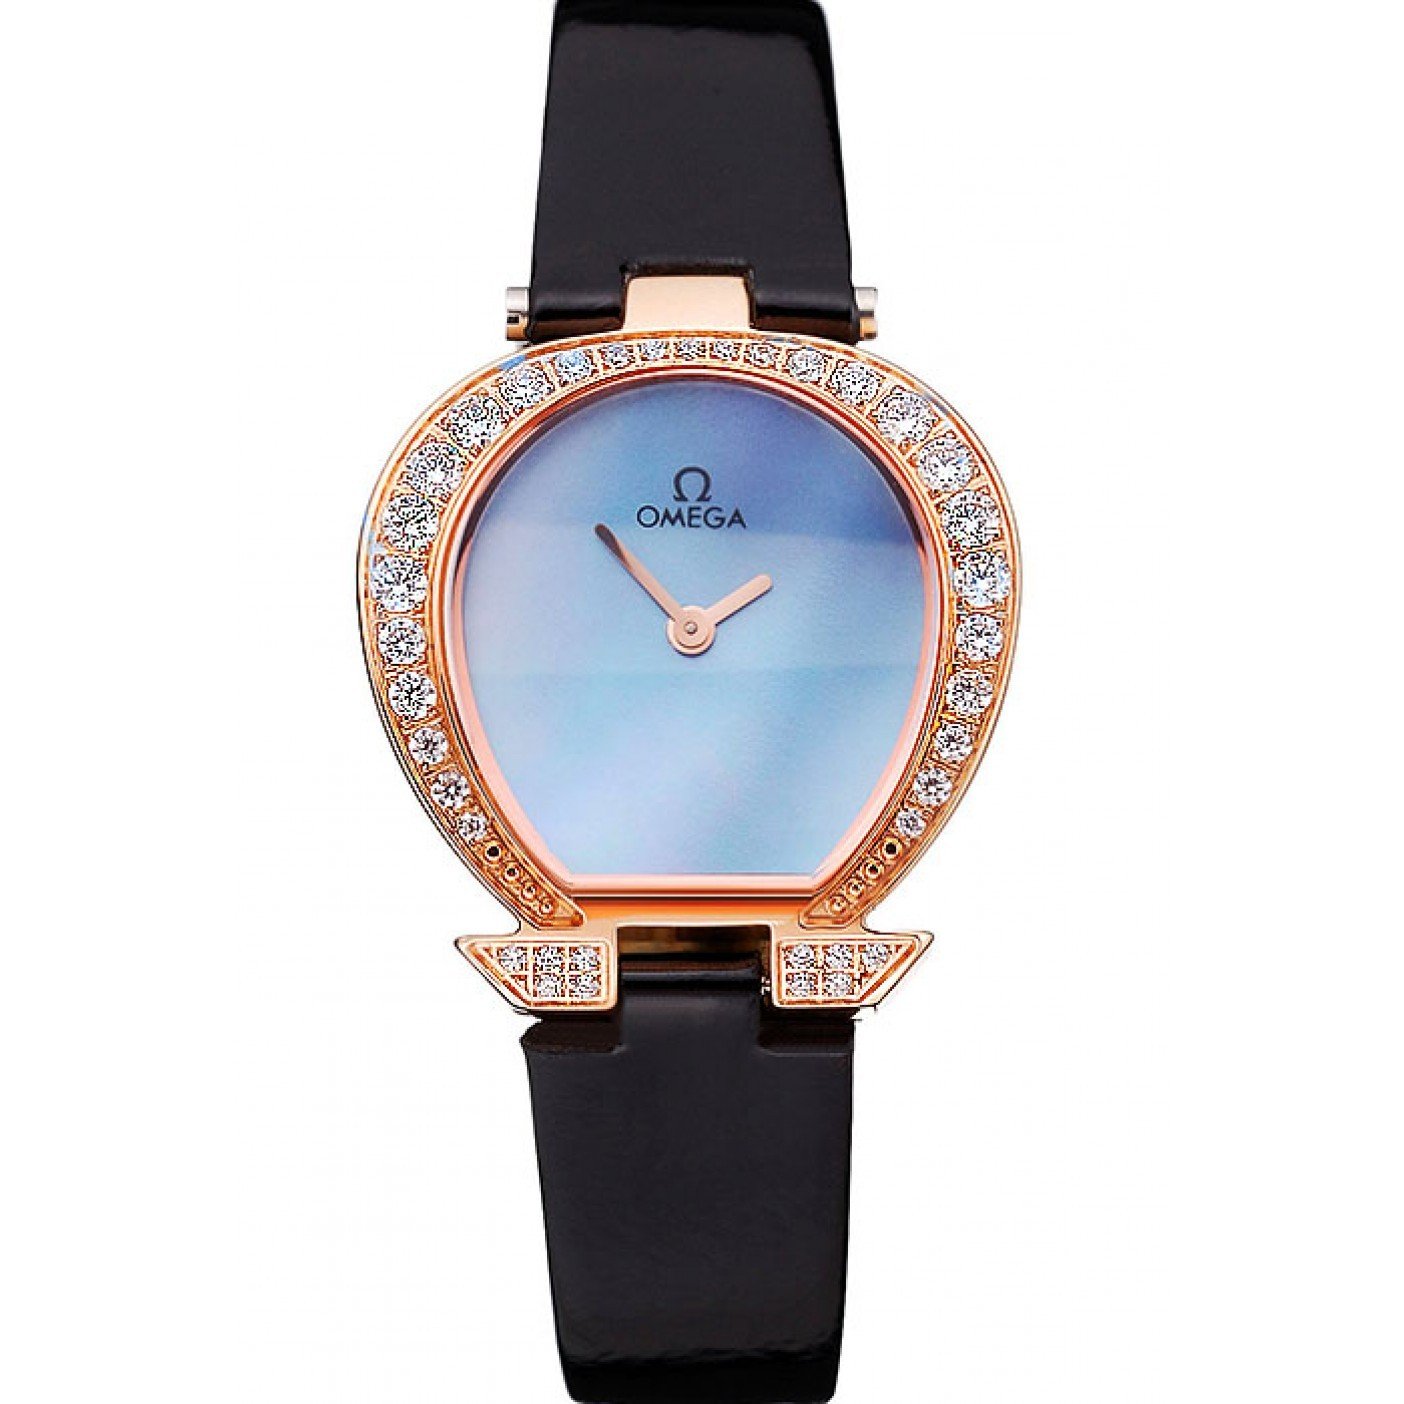 Omega Ladies Watch Blue Dial Gold Case With Diamonds Black Leather Strap 622830